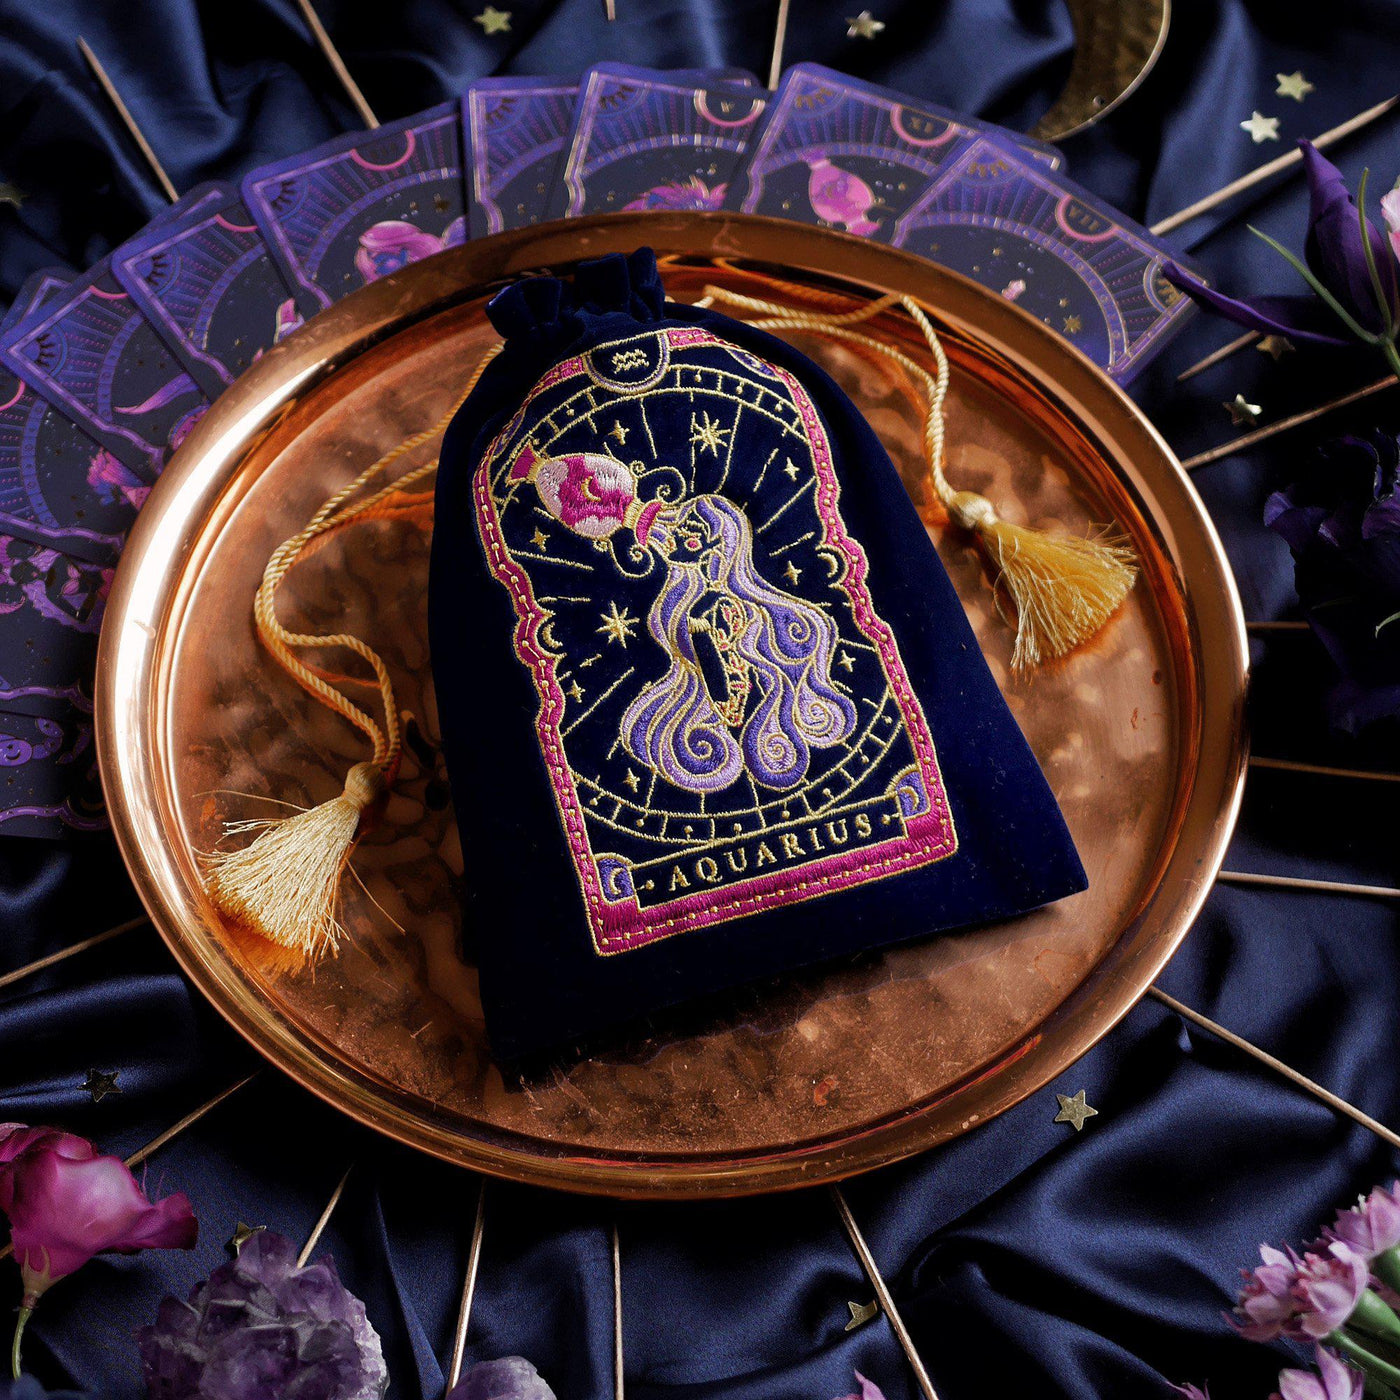 Aquarius Zodiac Tarot Deck Pouch Bag. Altar Decor protector bag for Tarot and Oracle decks. Dice bag Dungeons and Dragons D&D. Navy Blue Velvet with gold colourful Zodiac embroidery. Gold Tassel drawstring bag. Astrology decor. Zodiac gift. The Quirky Cup Collective